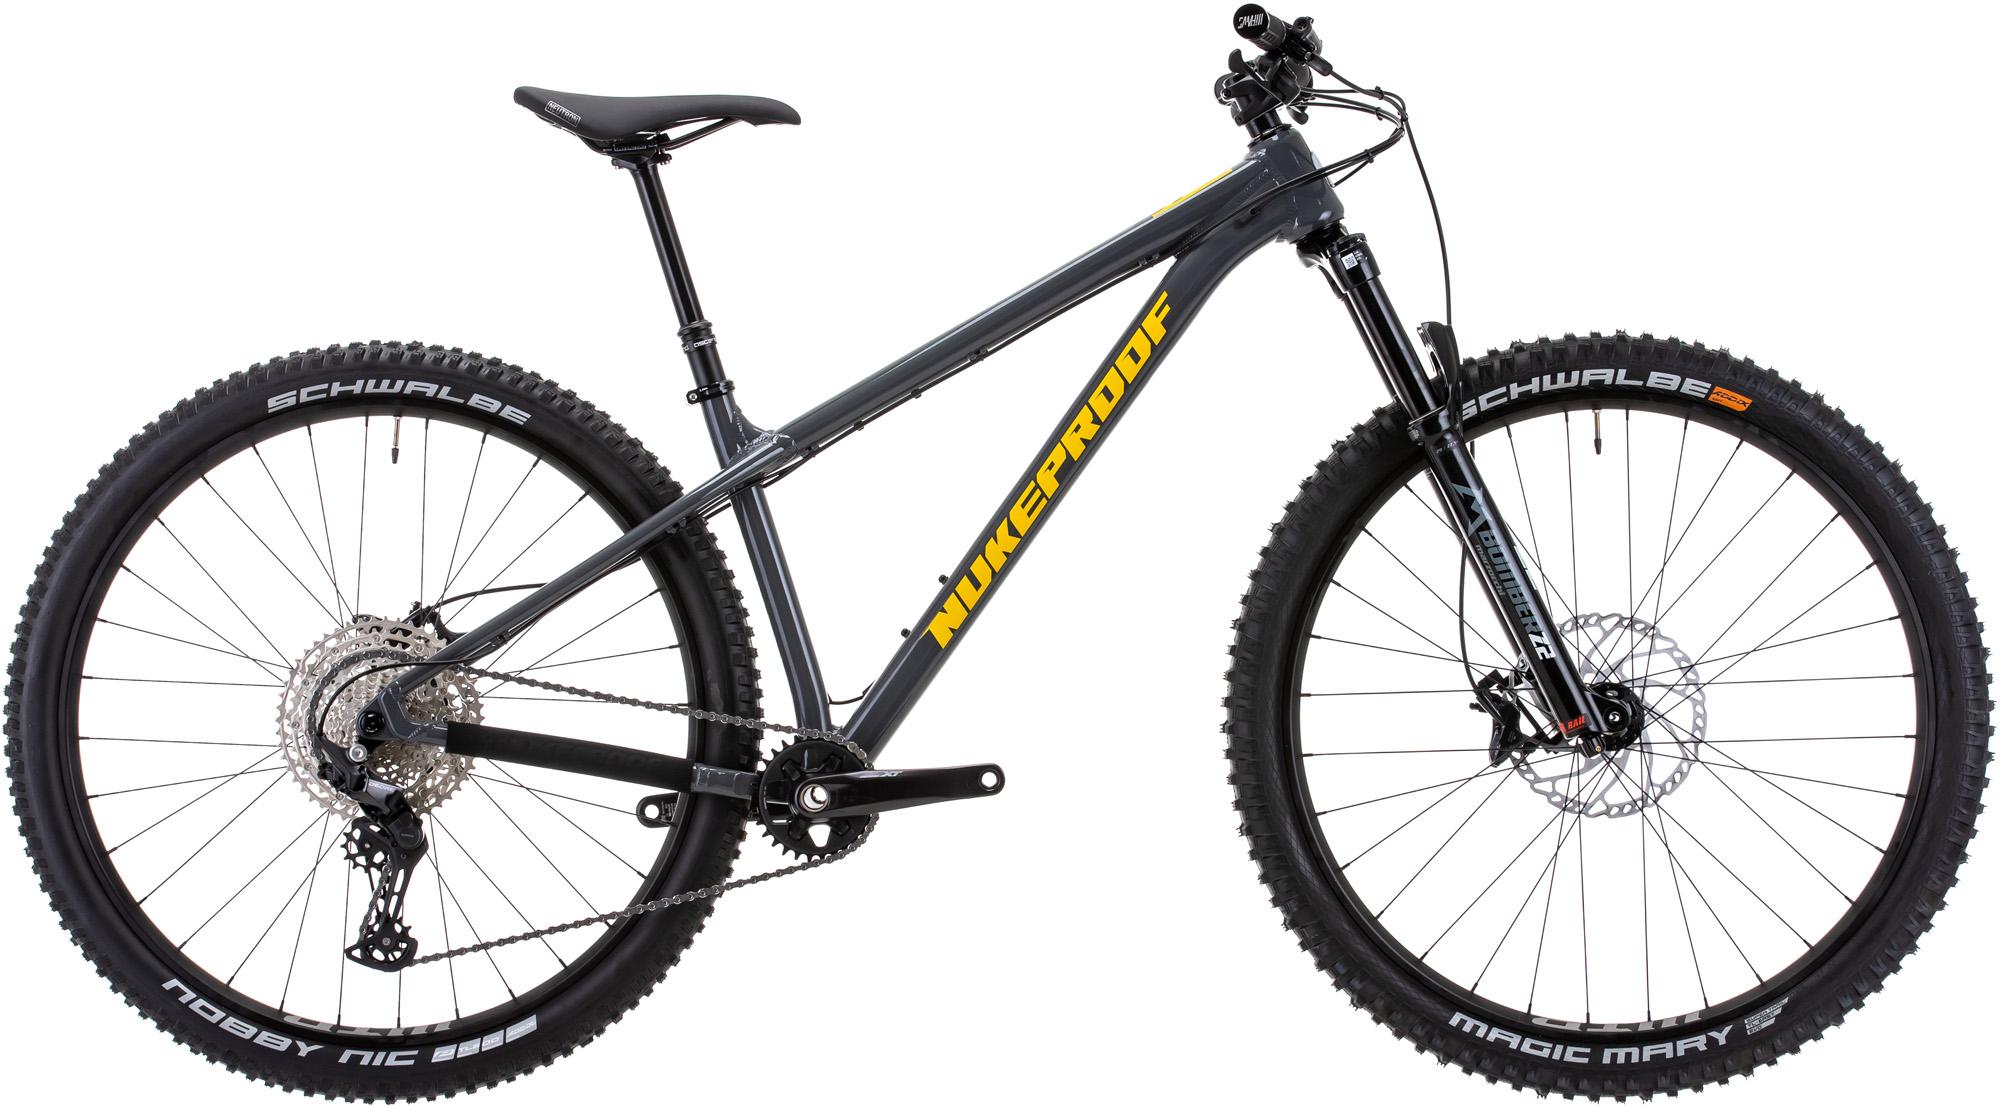 Nukeproof Scout 290 Comp Alloy Mountain Bike (deore12) - Bullet Grey